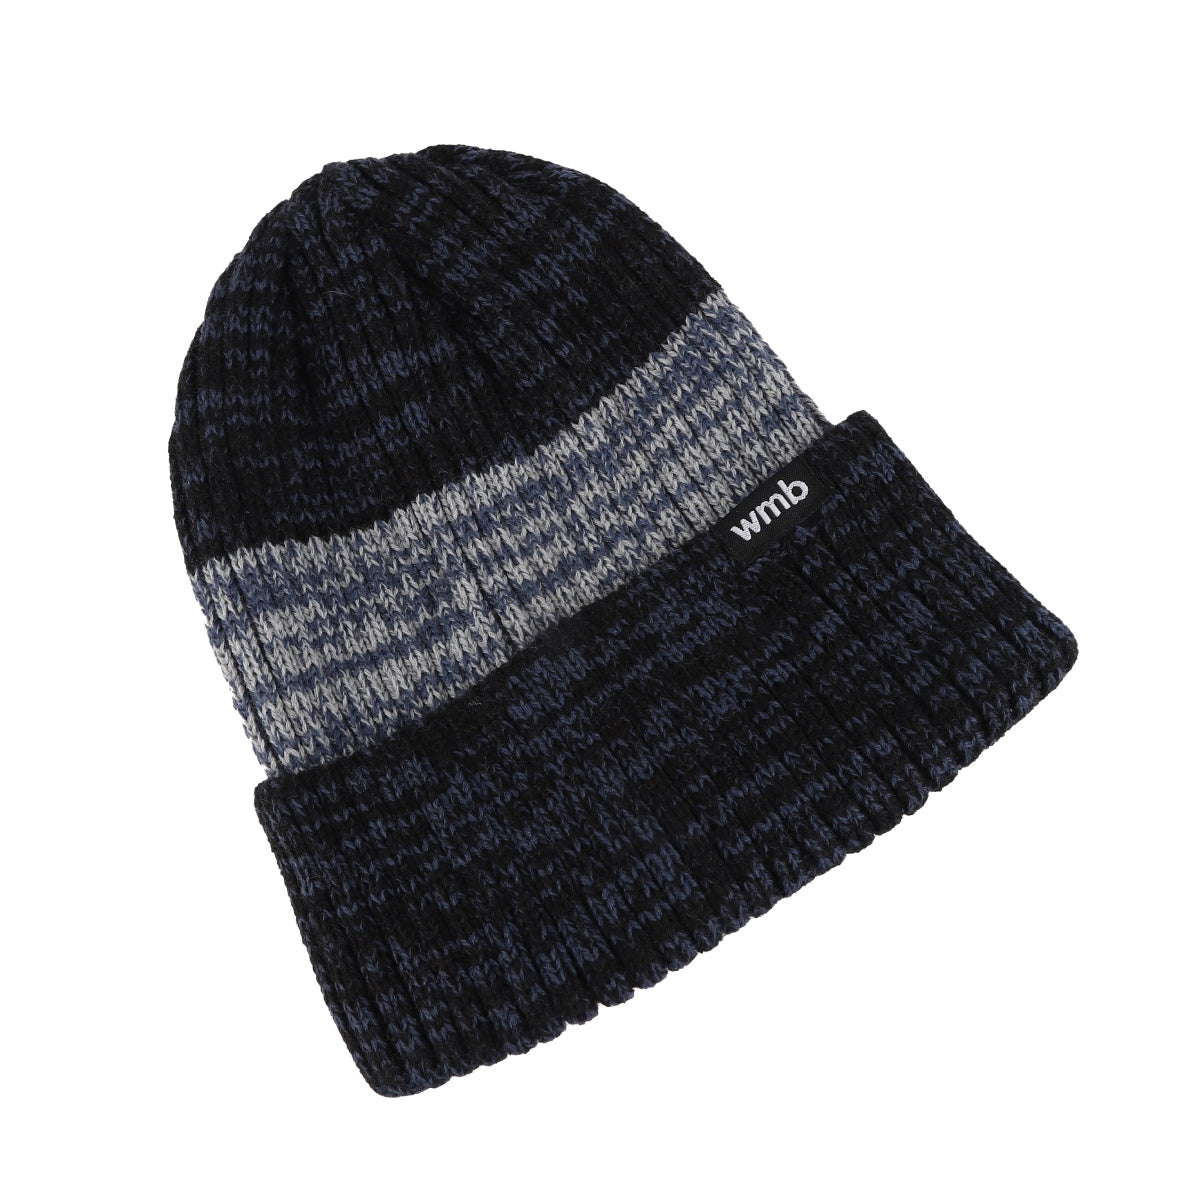 Winter Cap - Mixed styles, mixed colors with curled edges